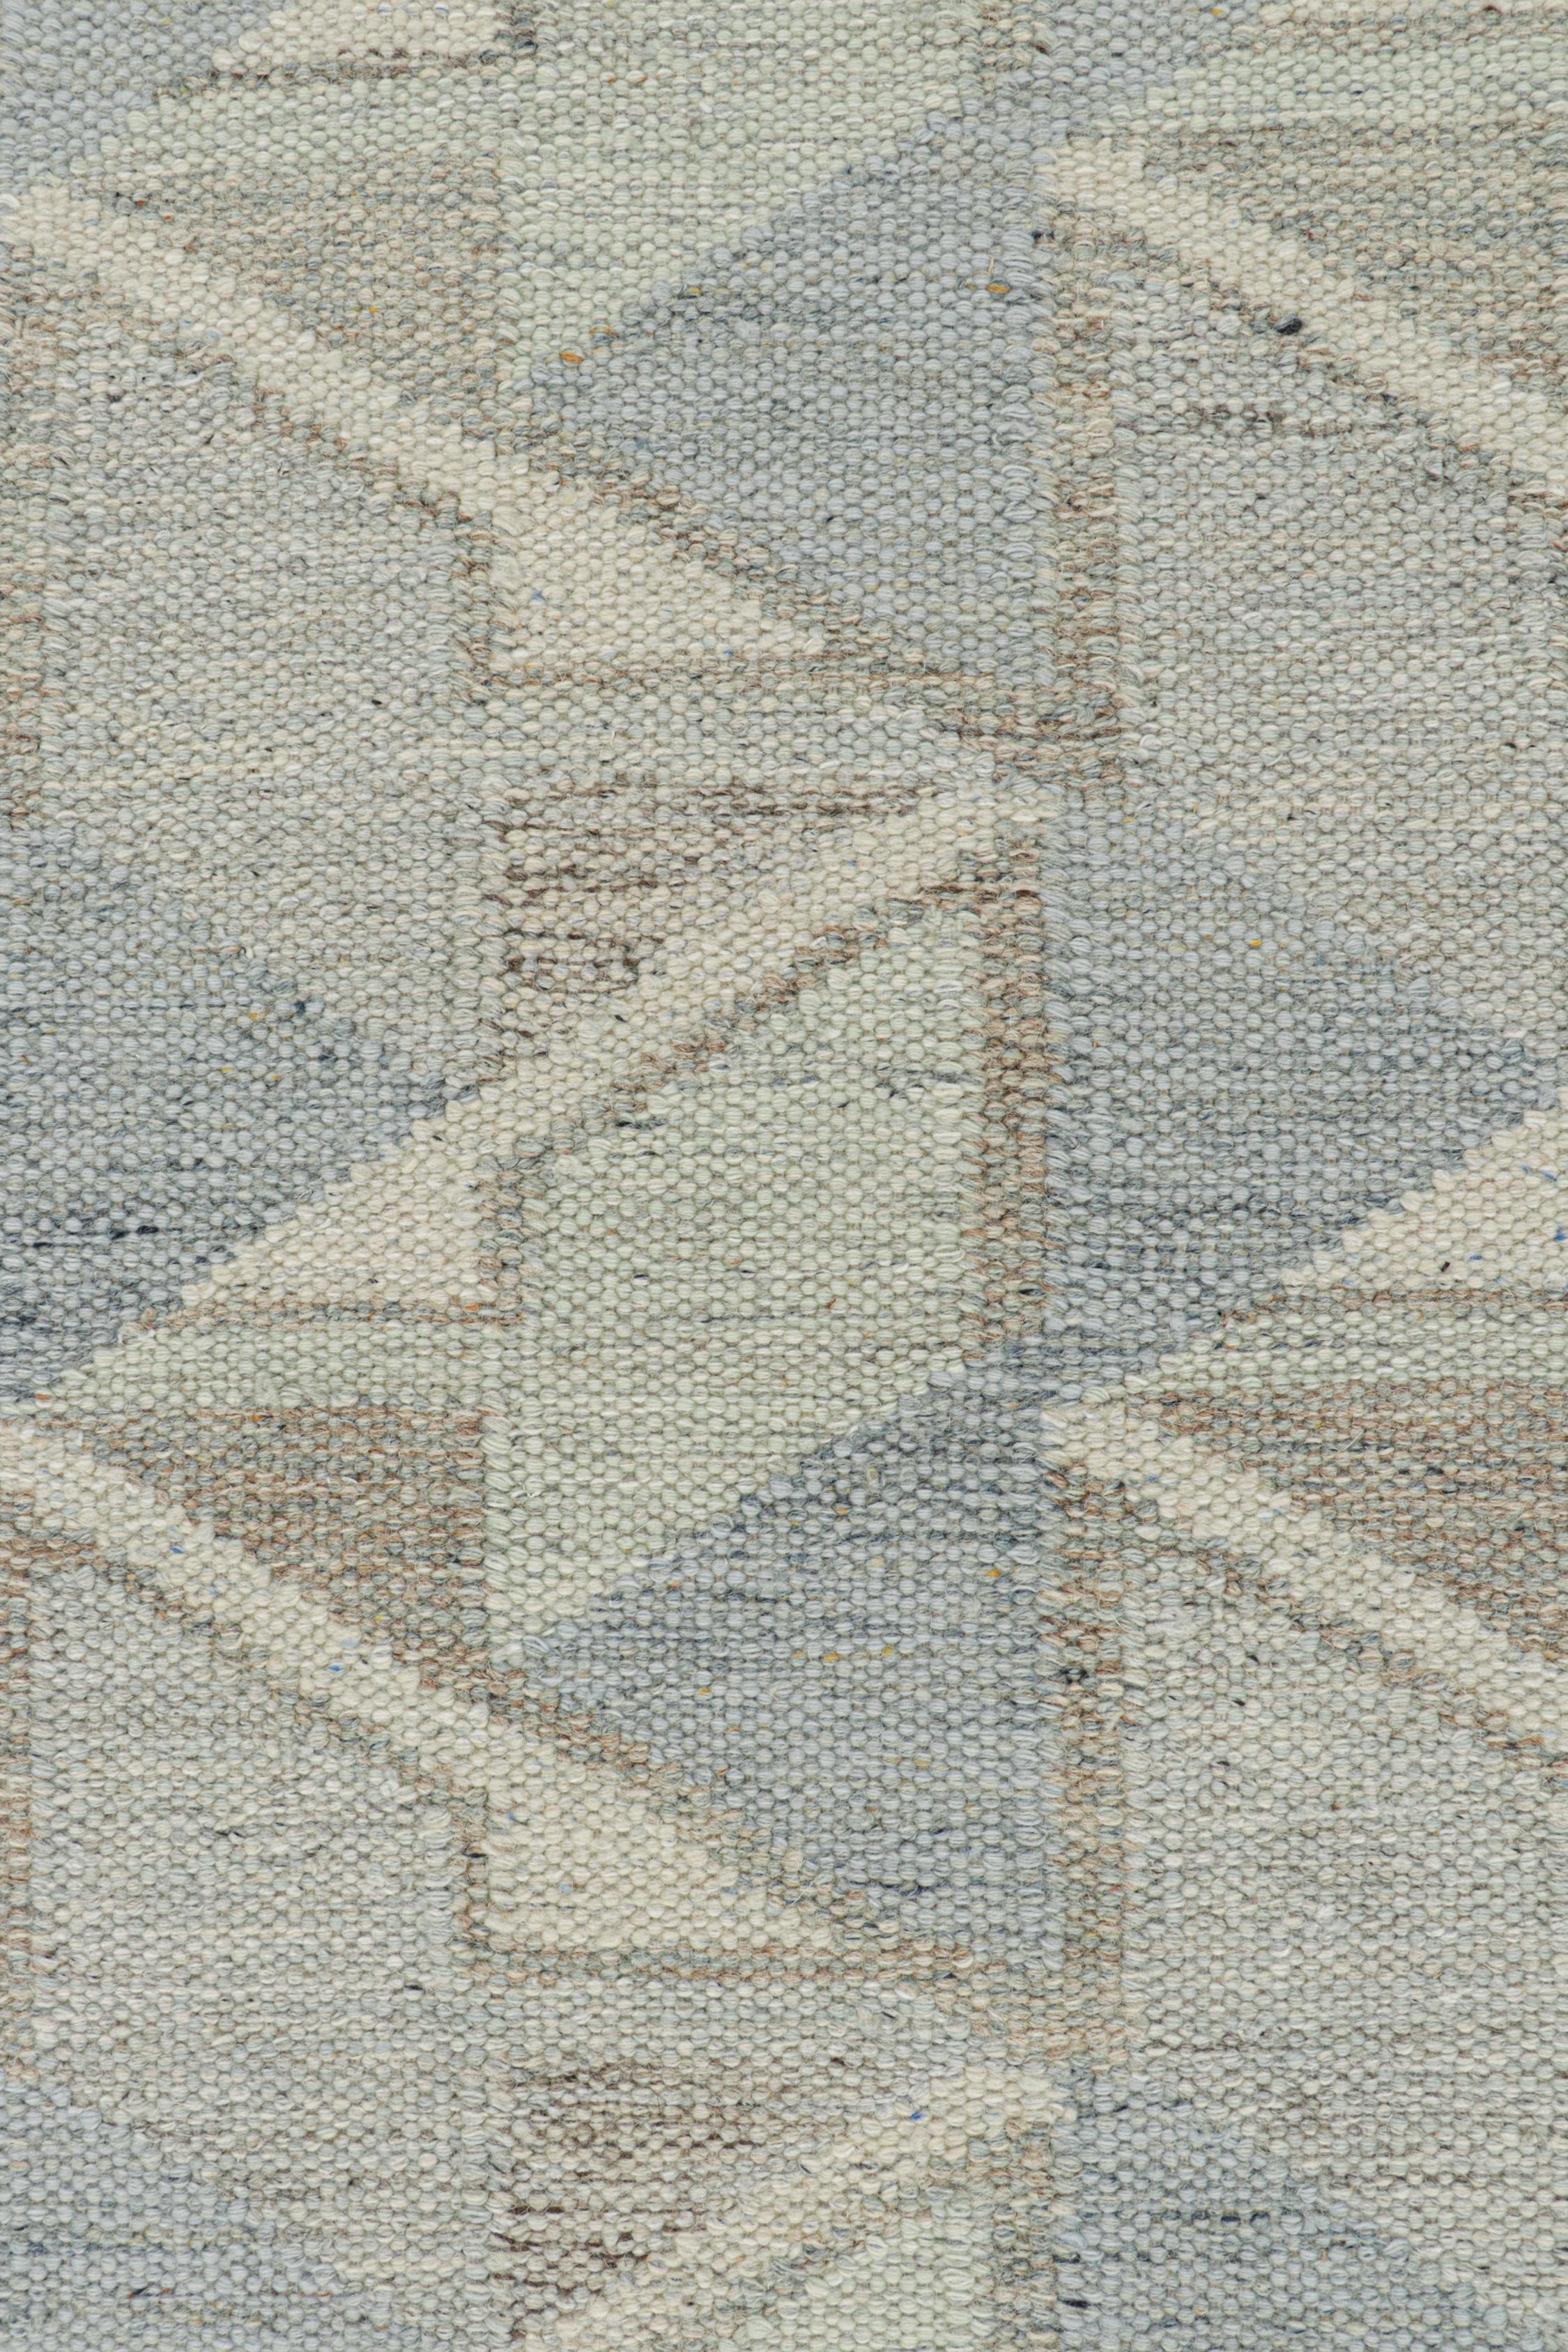 Rug & Kilim’s Scandinavian Style Kilim in Gray, White, & Blue Geometric Patterns In New Condition For Sale In Long Island City, NY